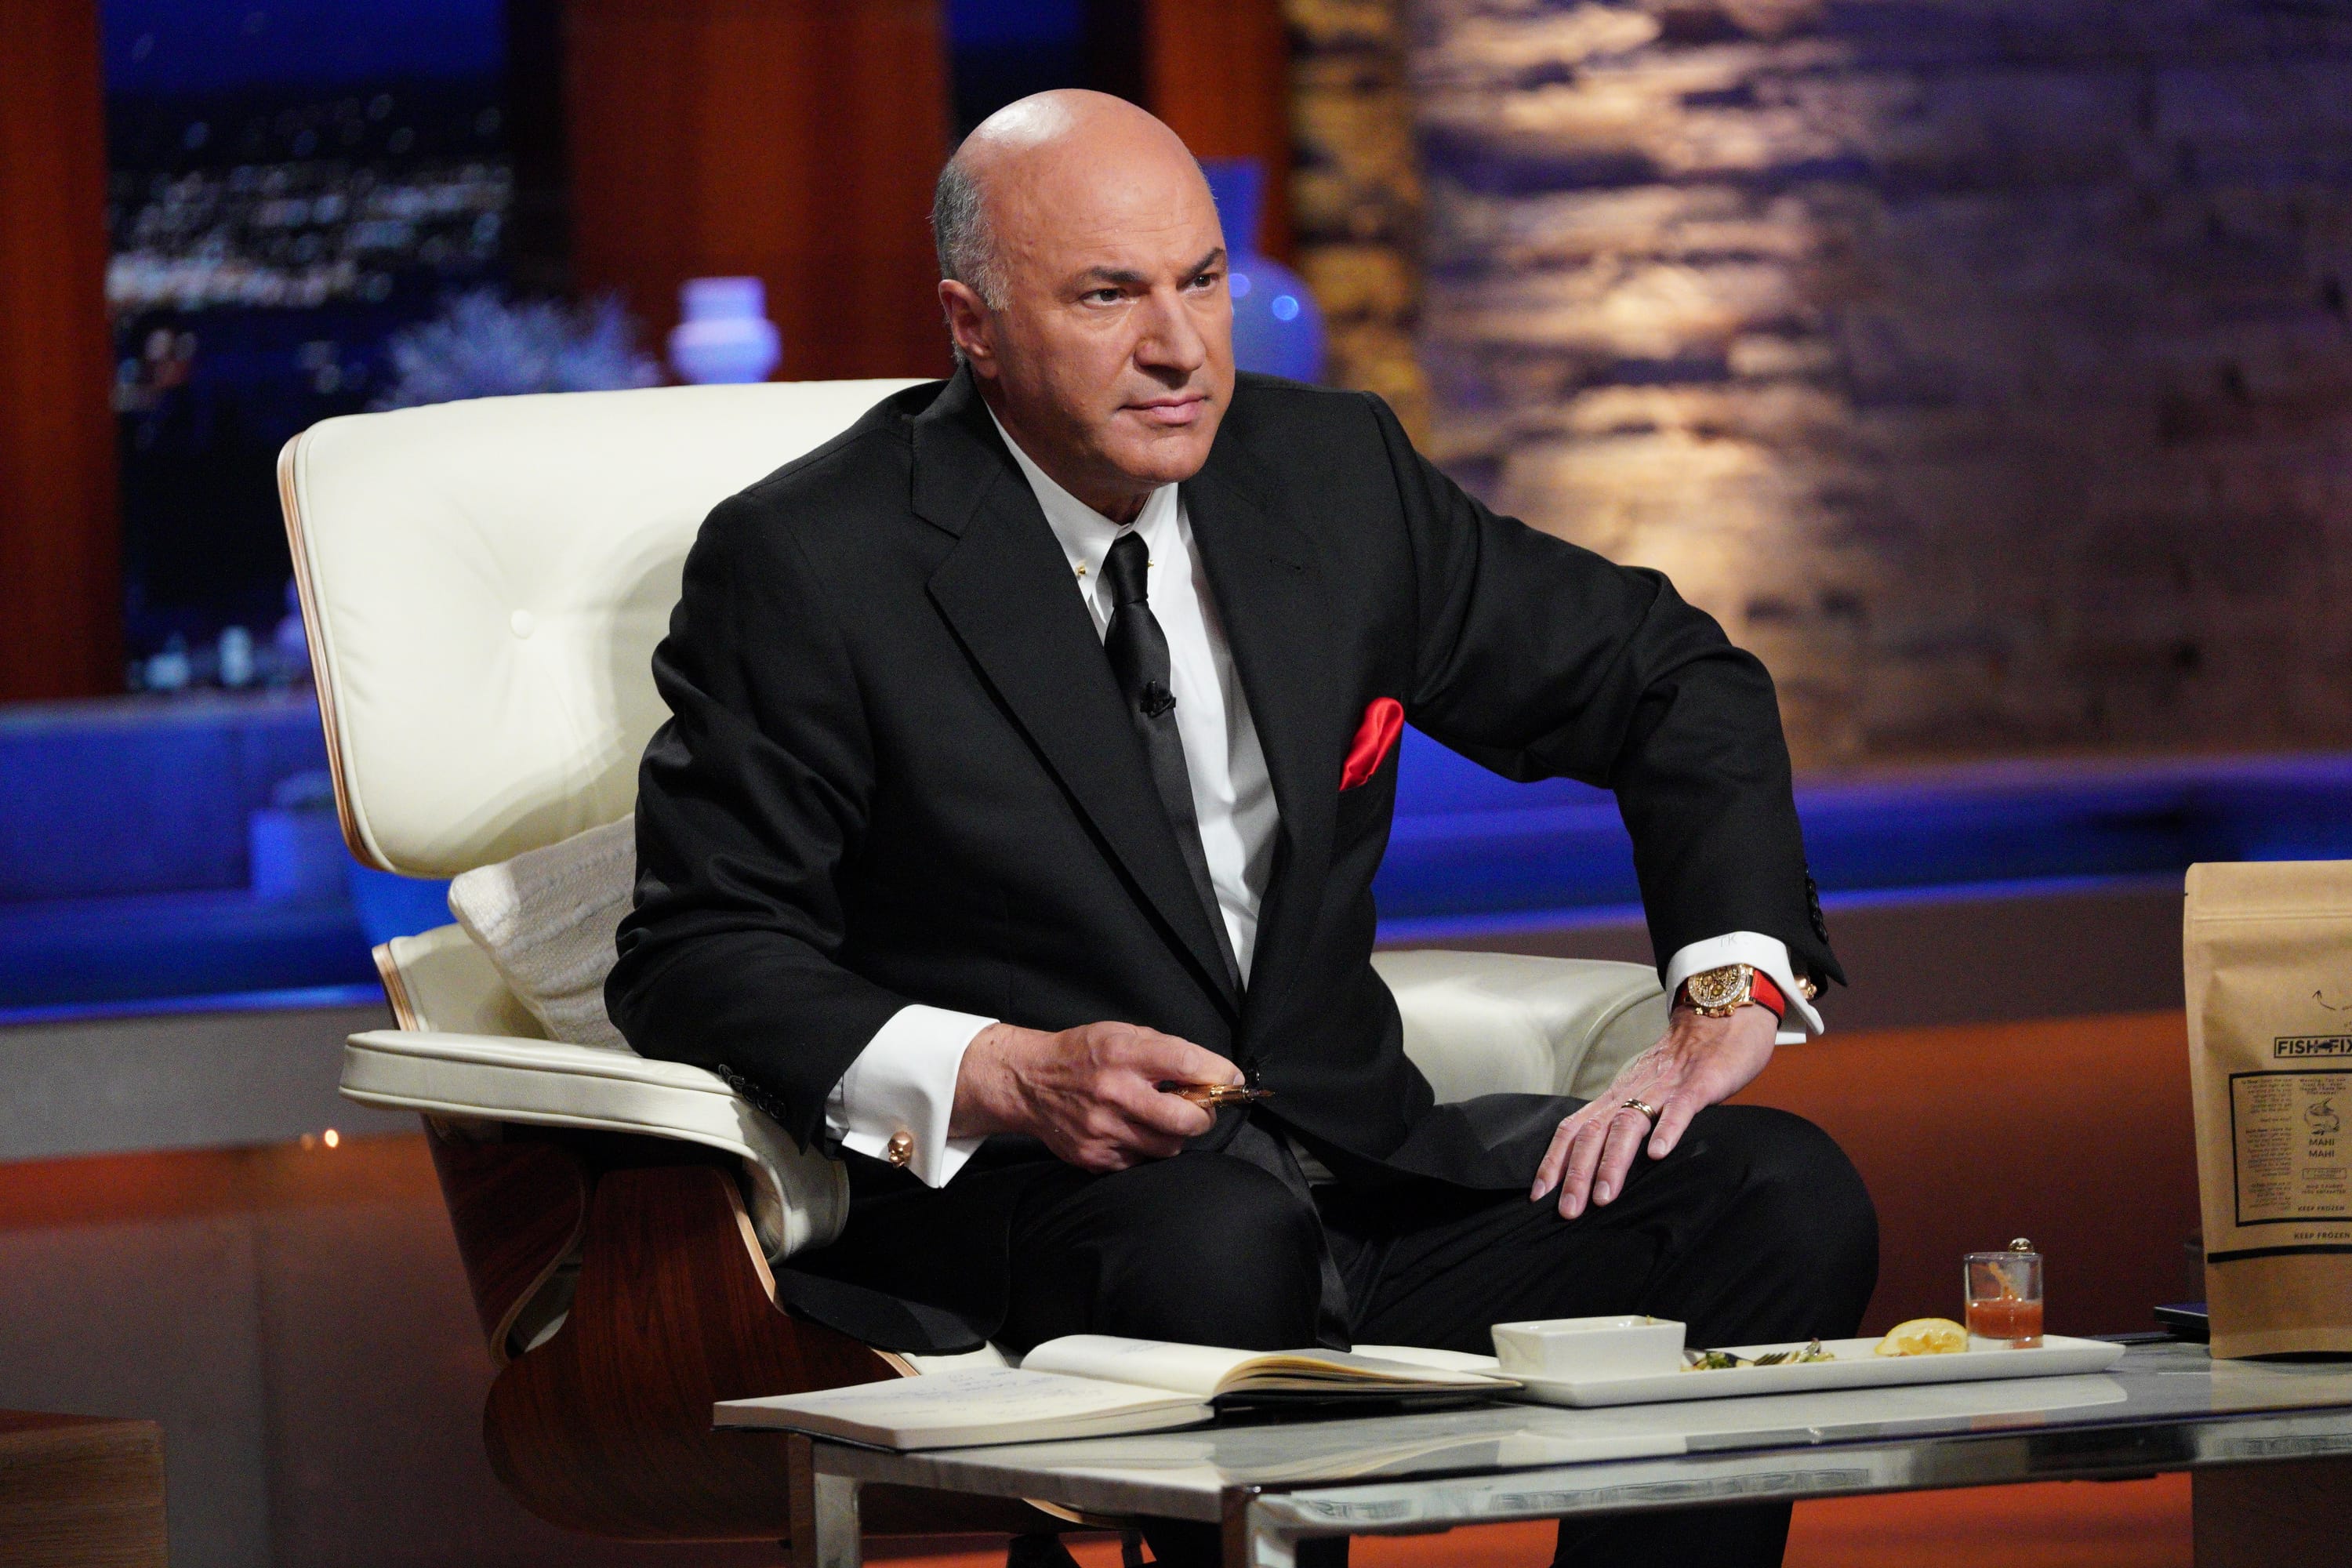 Kevin O'Leary and Le-Glue Strike A Deal on Shark Tank